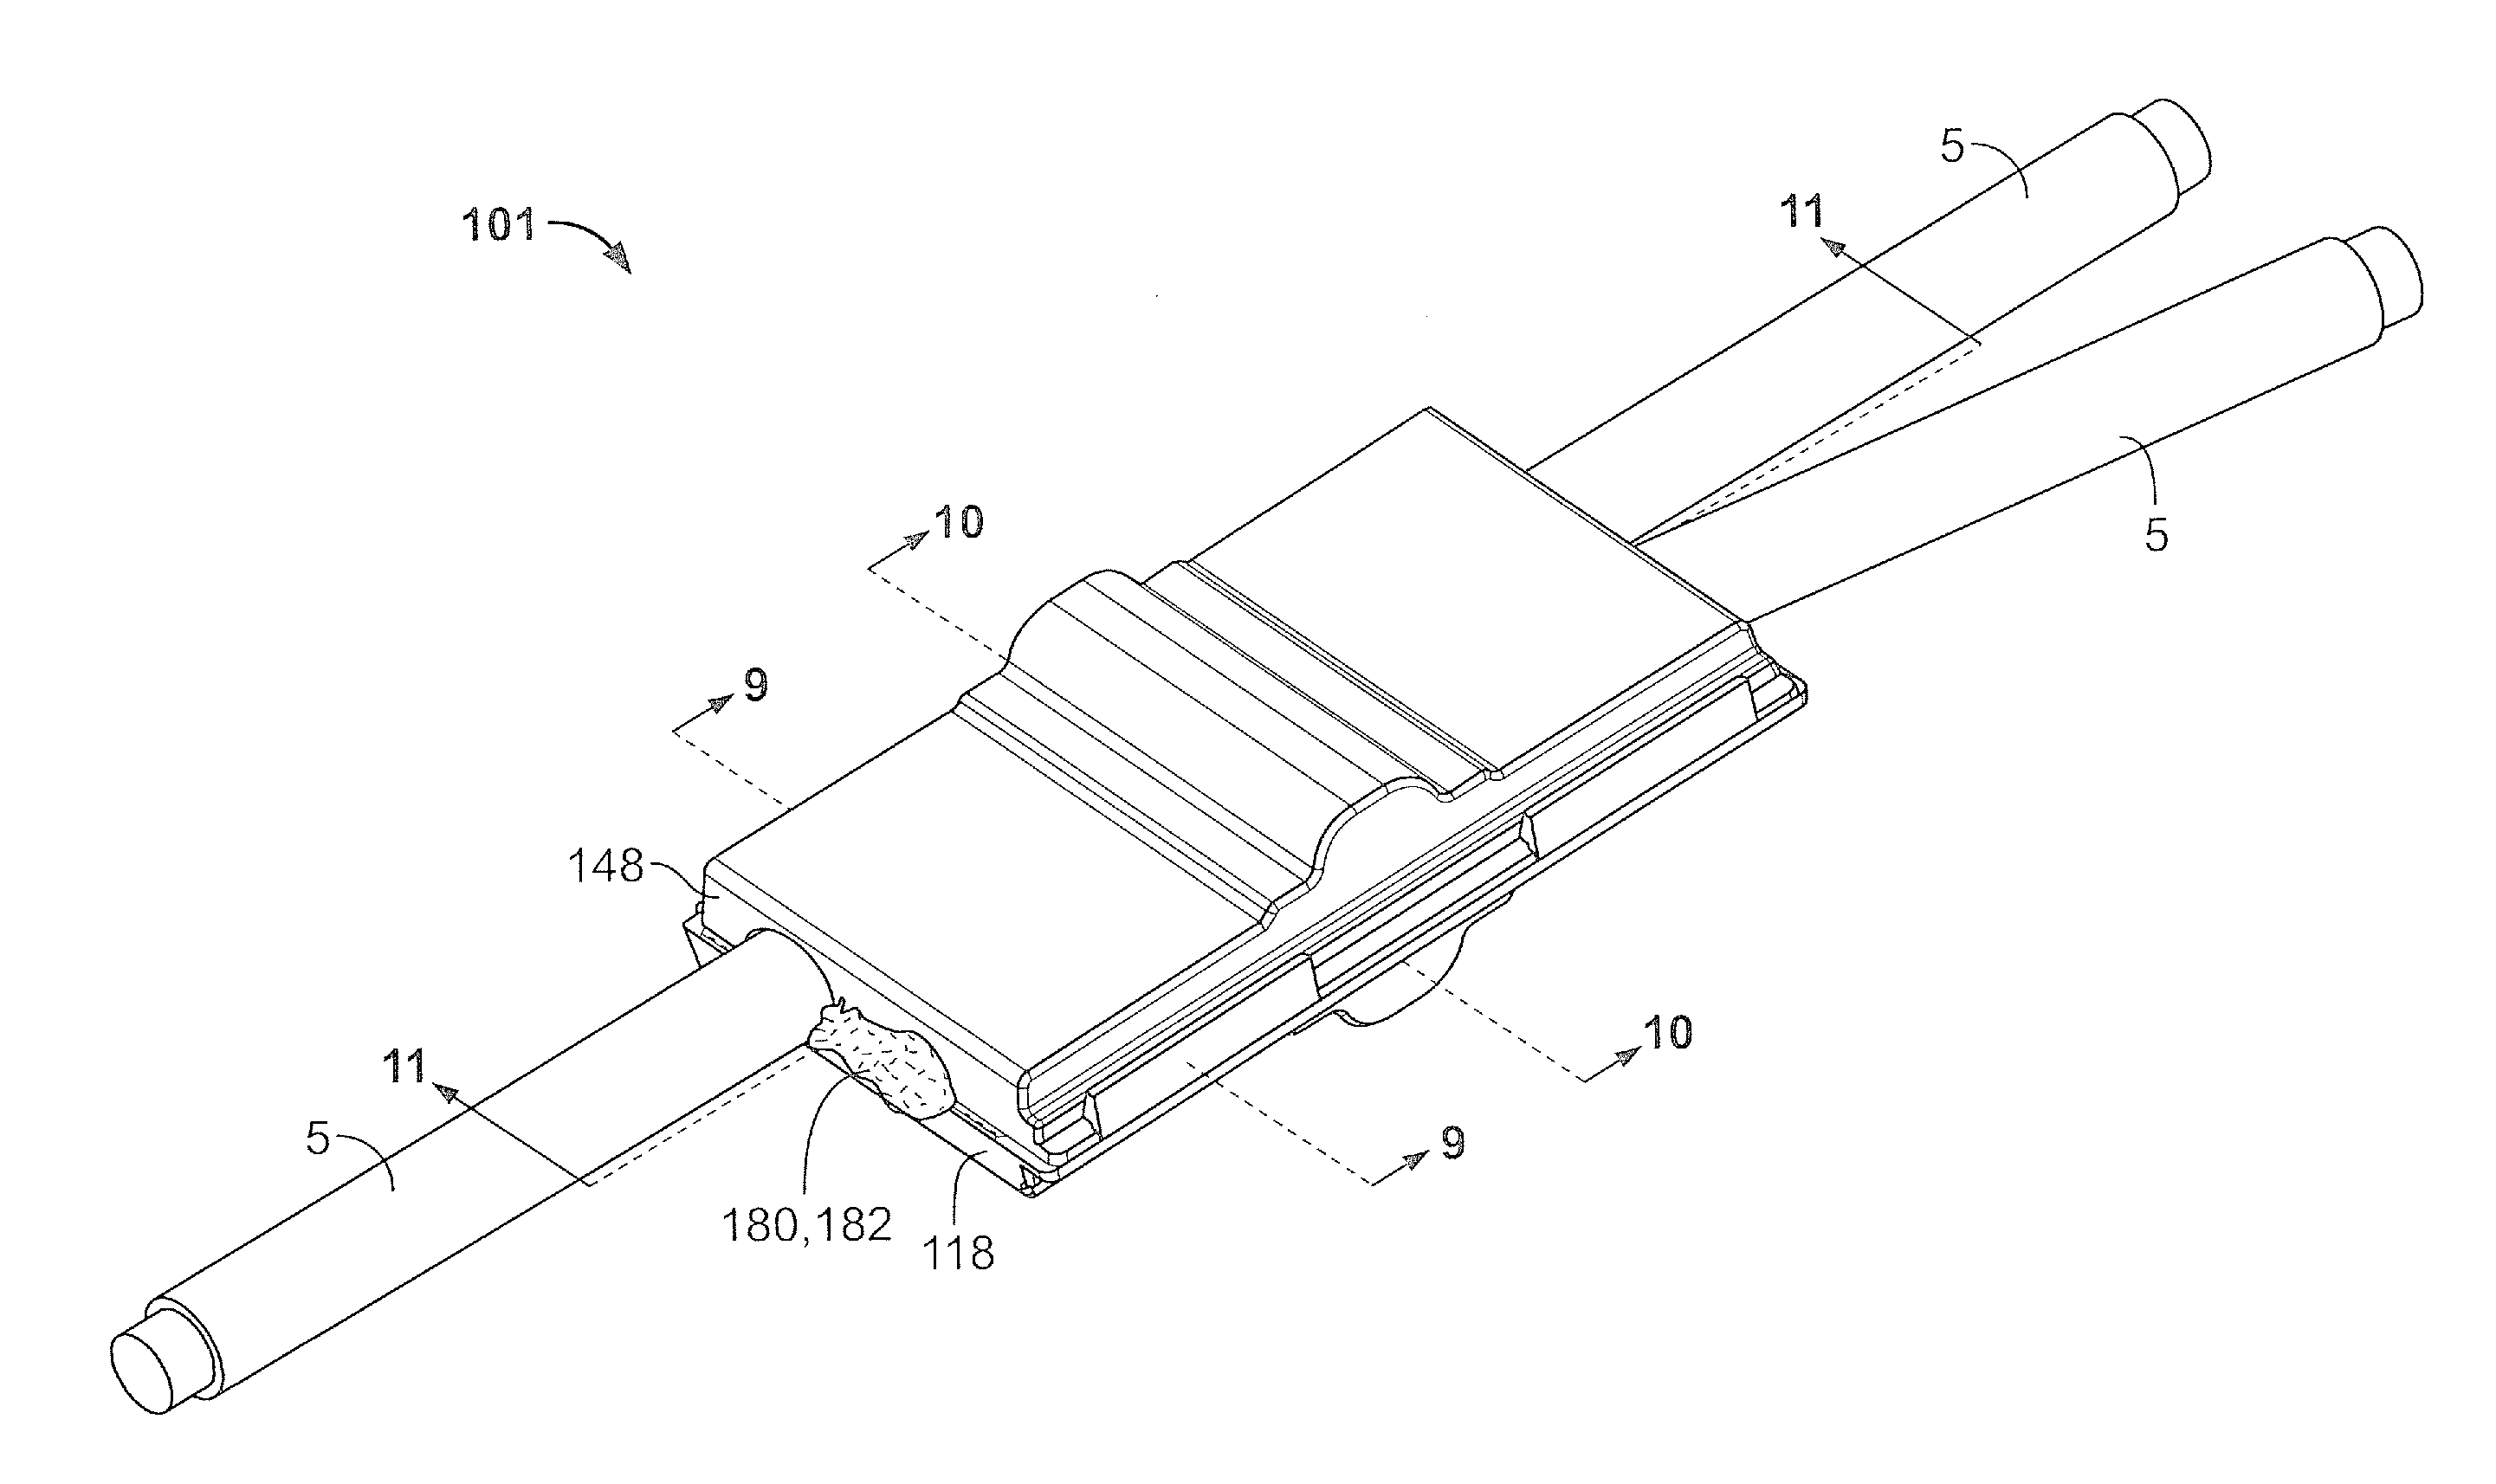 Sealant-filled enclosures and methods for environmentally protecting a connection